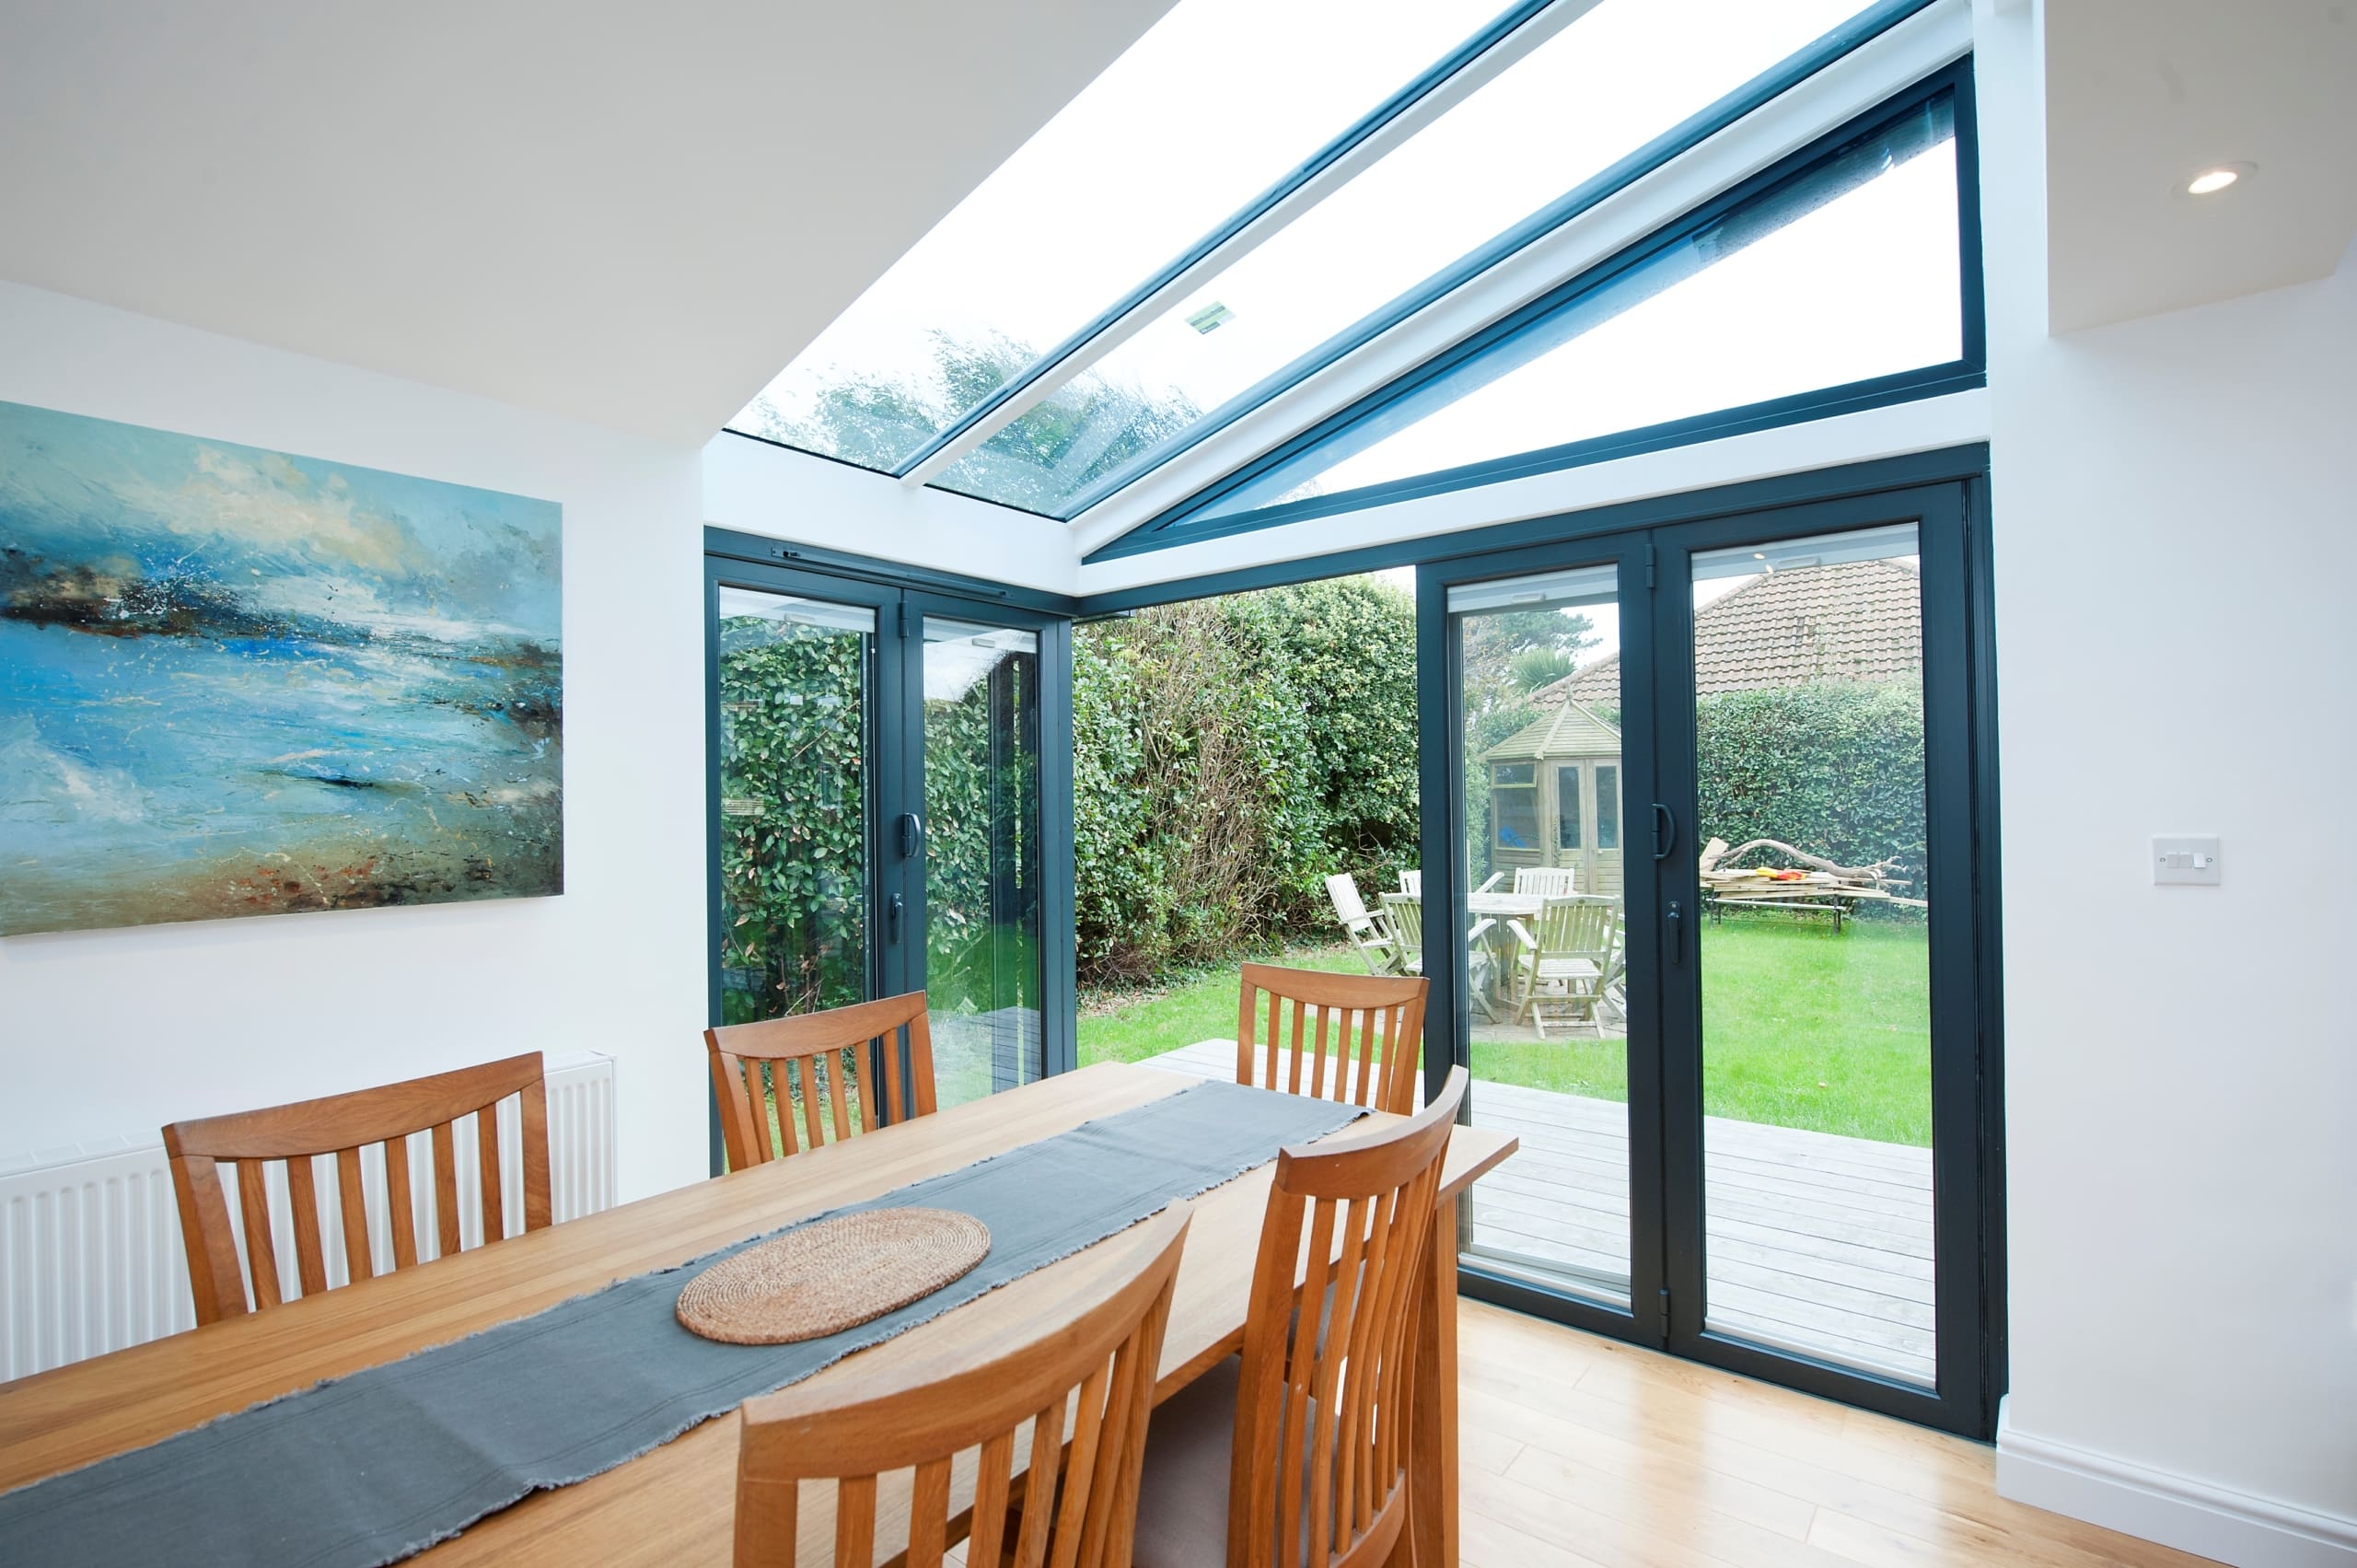 Bifolding door to rear of a house.